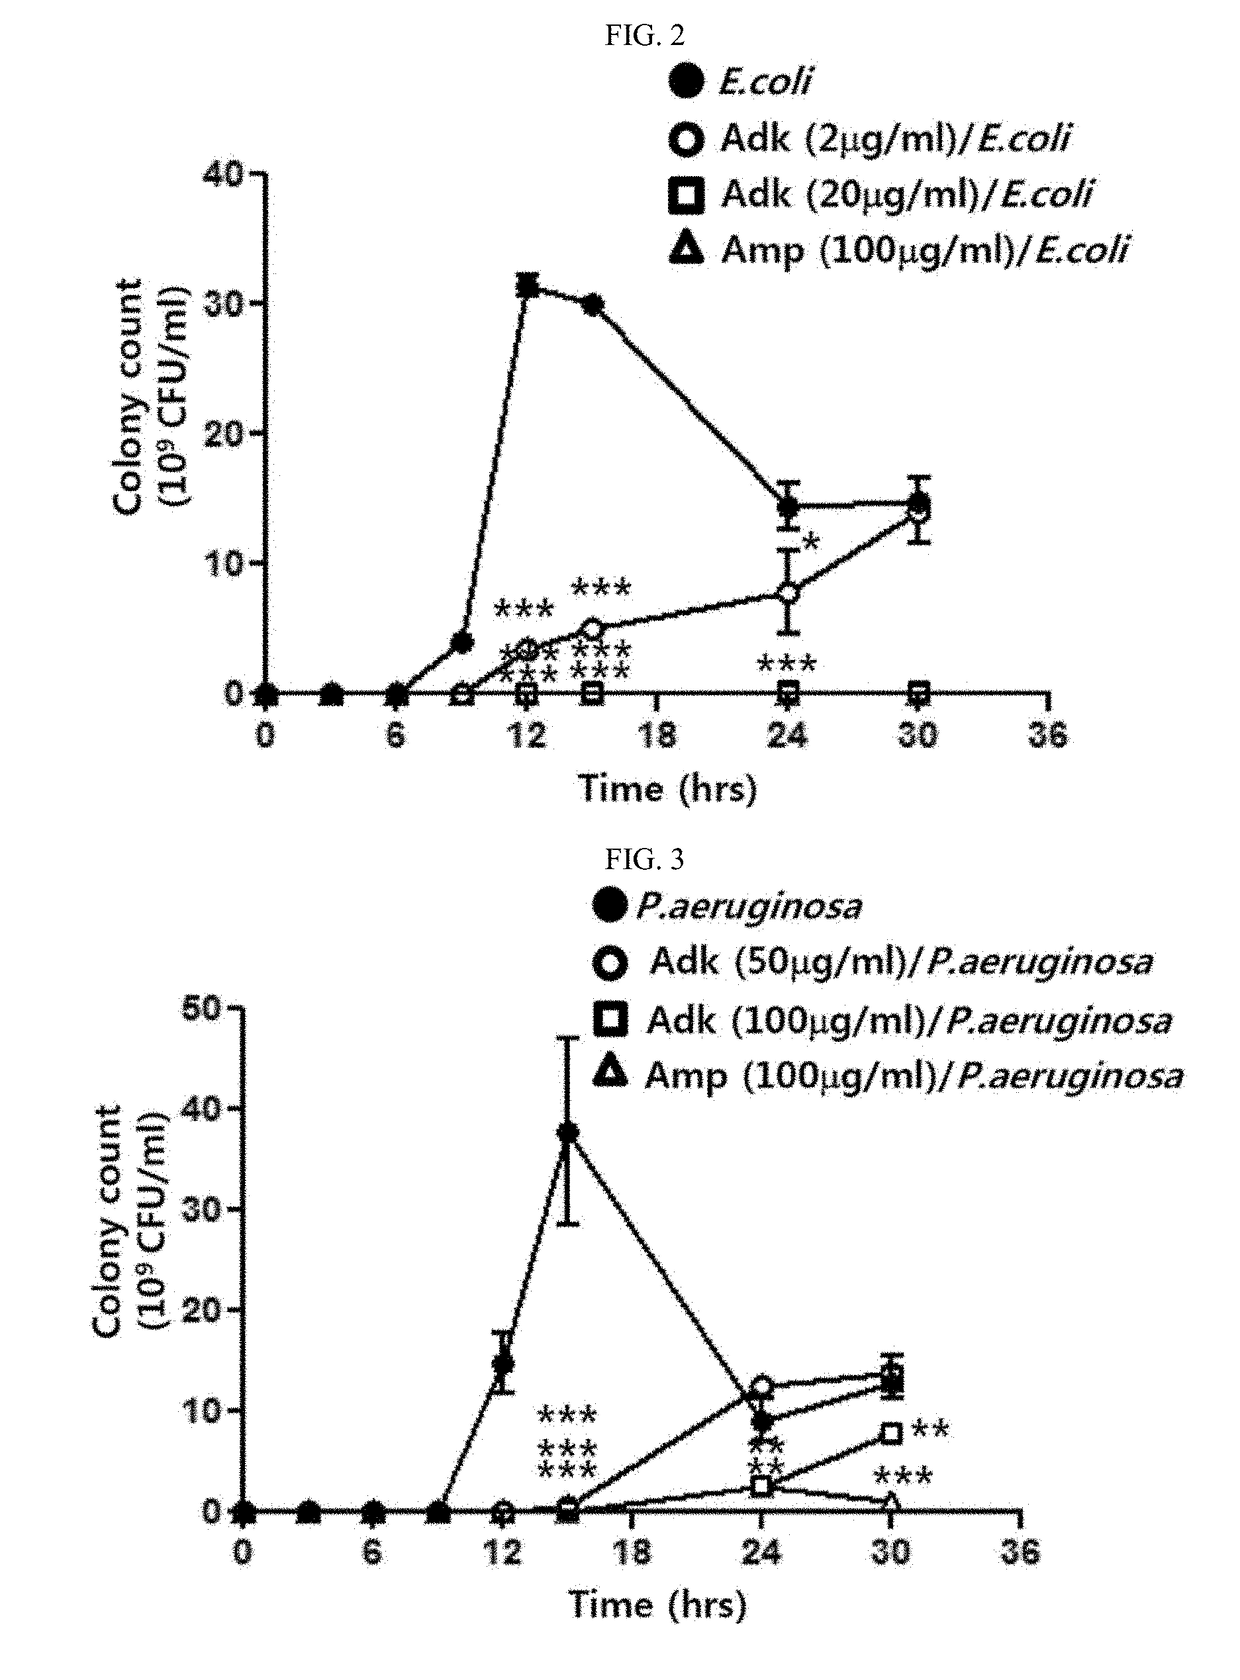 Antibacterial composition containing adk protein as active ingredient, or composition for preventing or treating sepsis